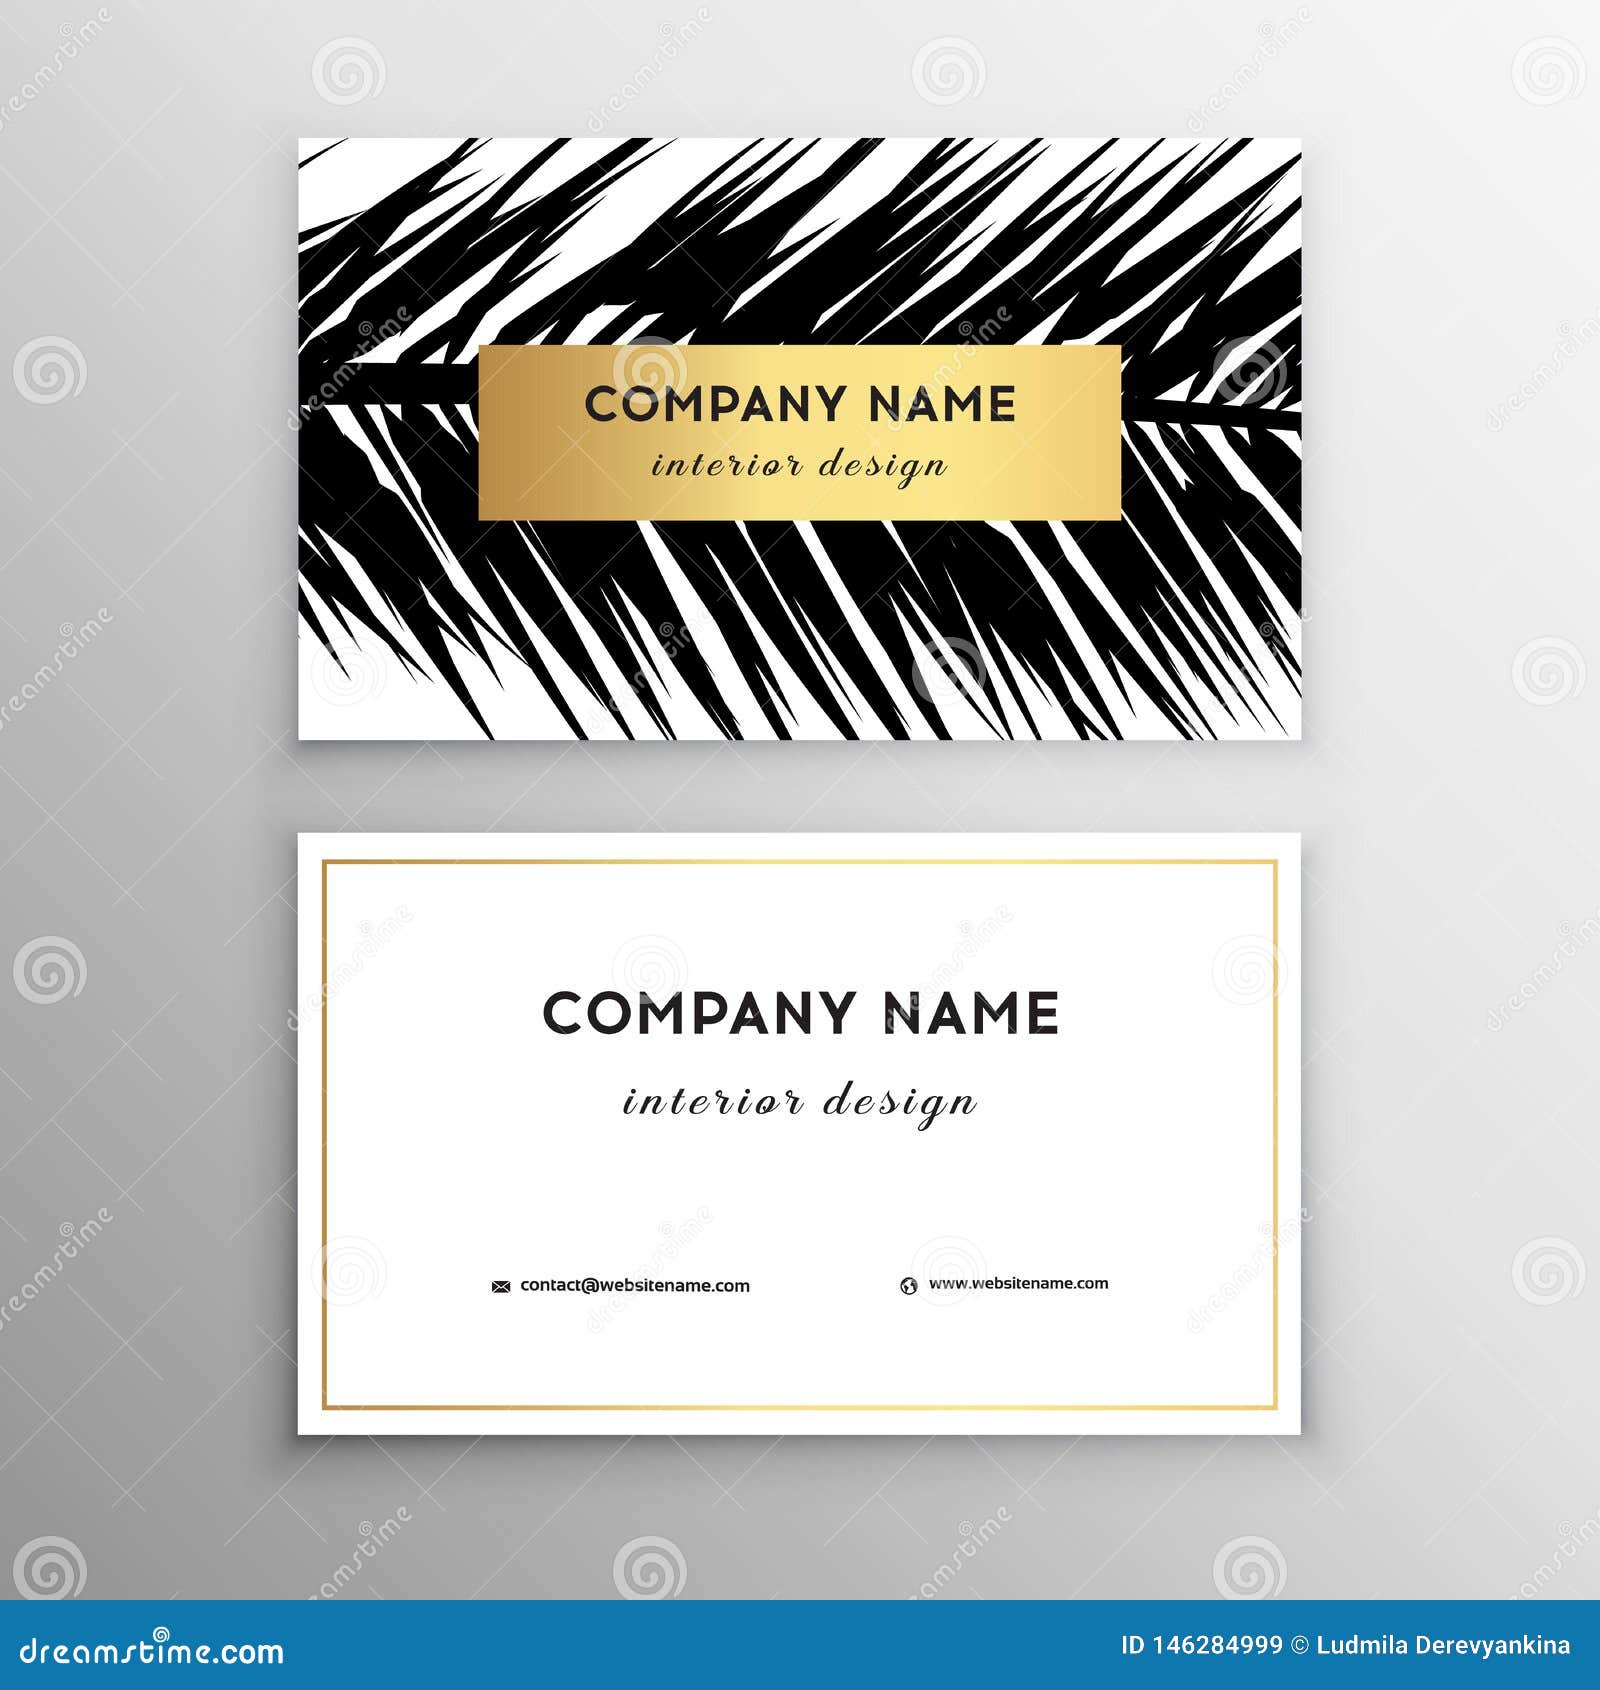 Name Cards Template from thumbs.dreamstime.com